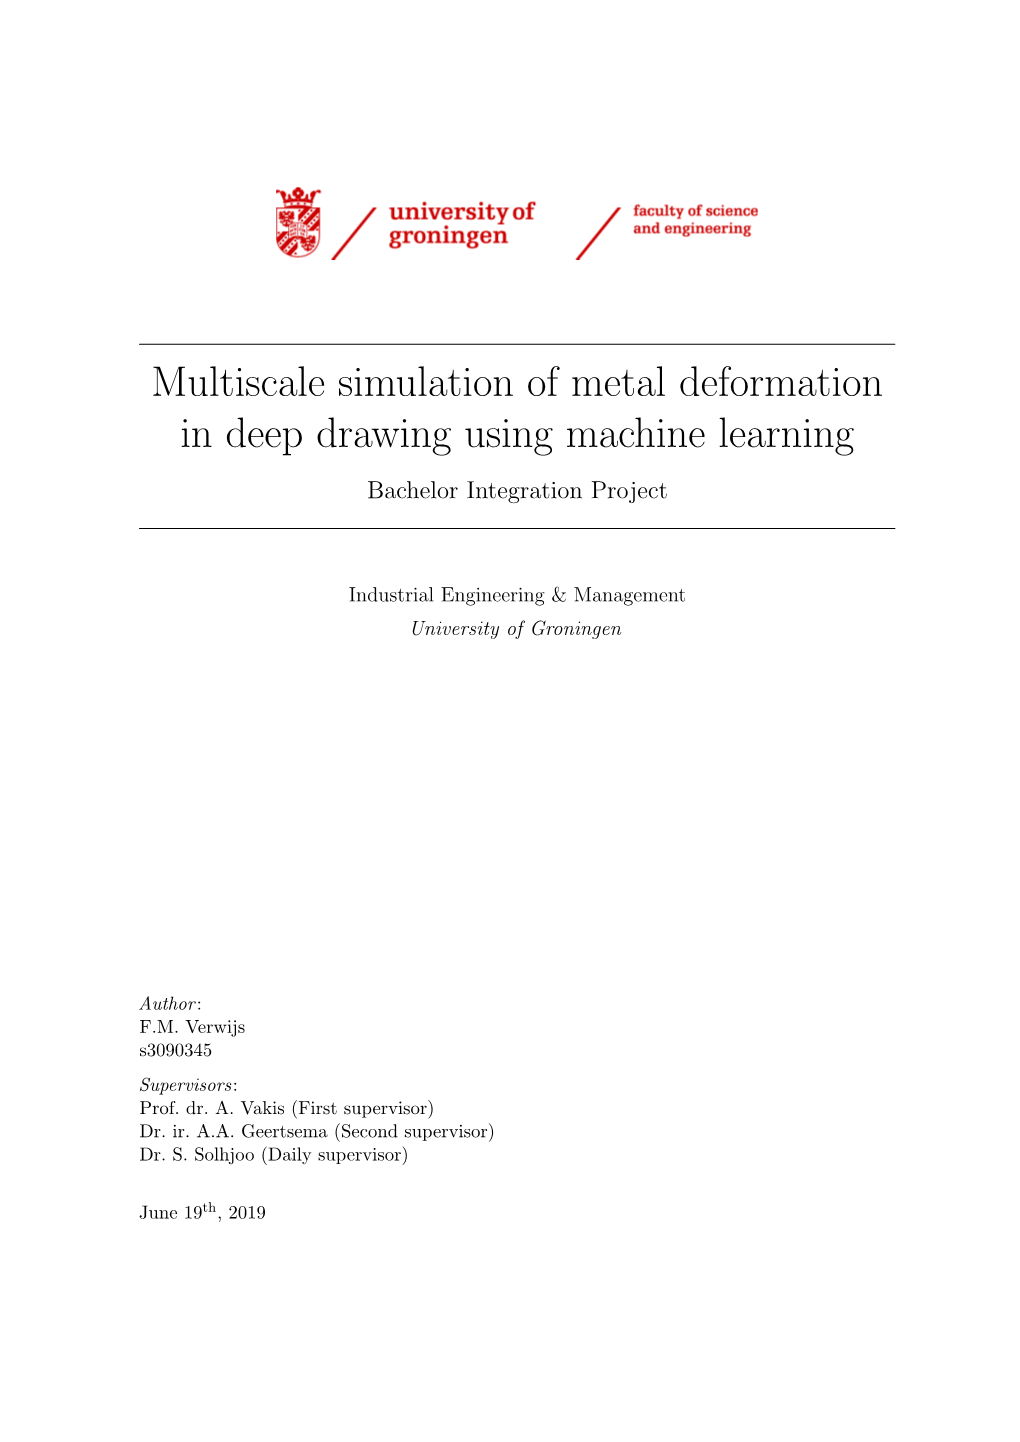 Multiscale Simulation of Metal Deformation in Deep Drawing Using Machine Learning Bachelor Integration Project